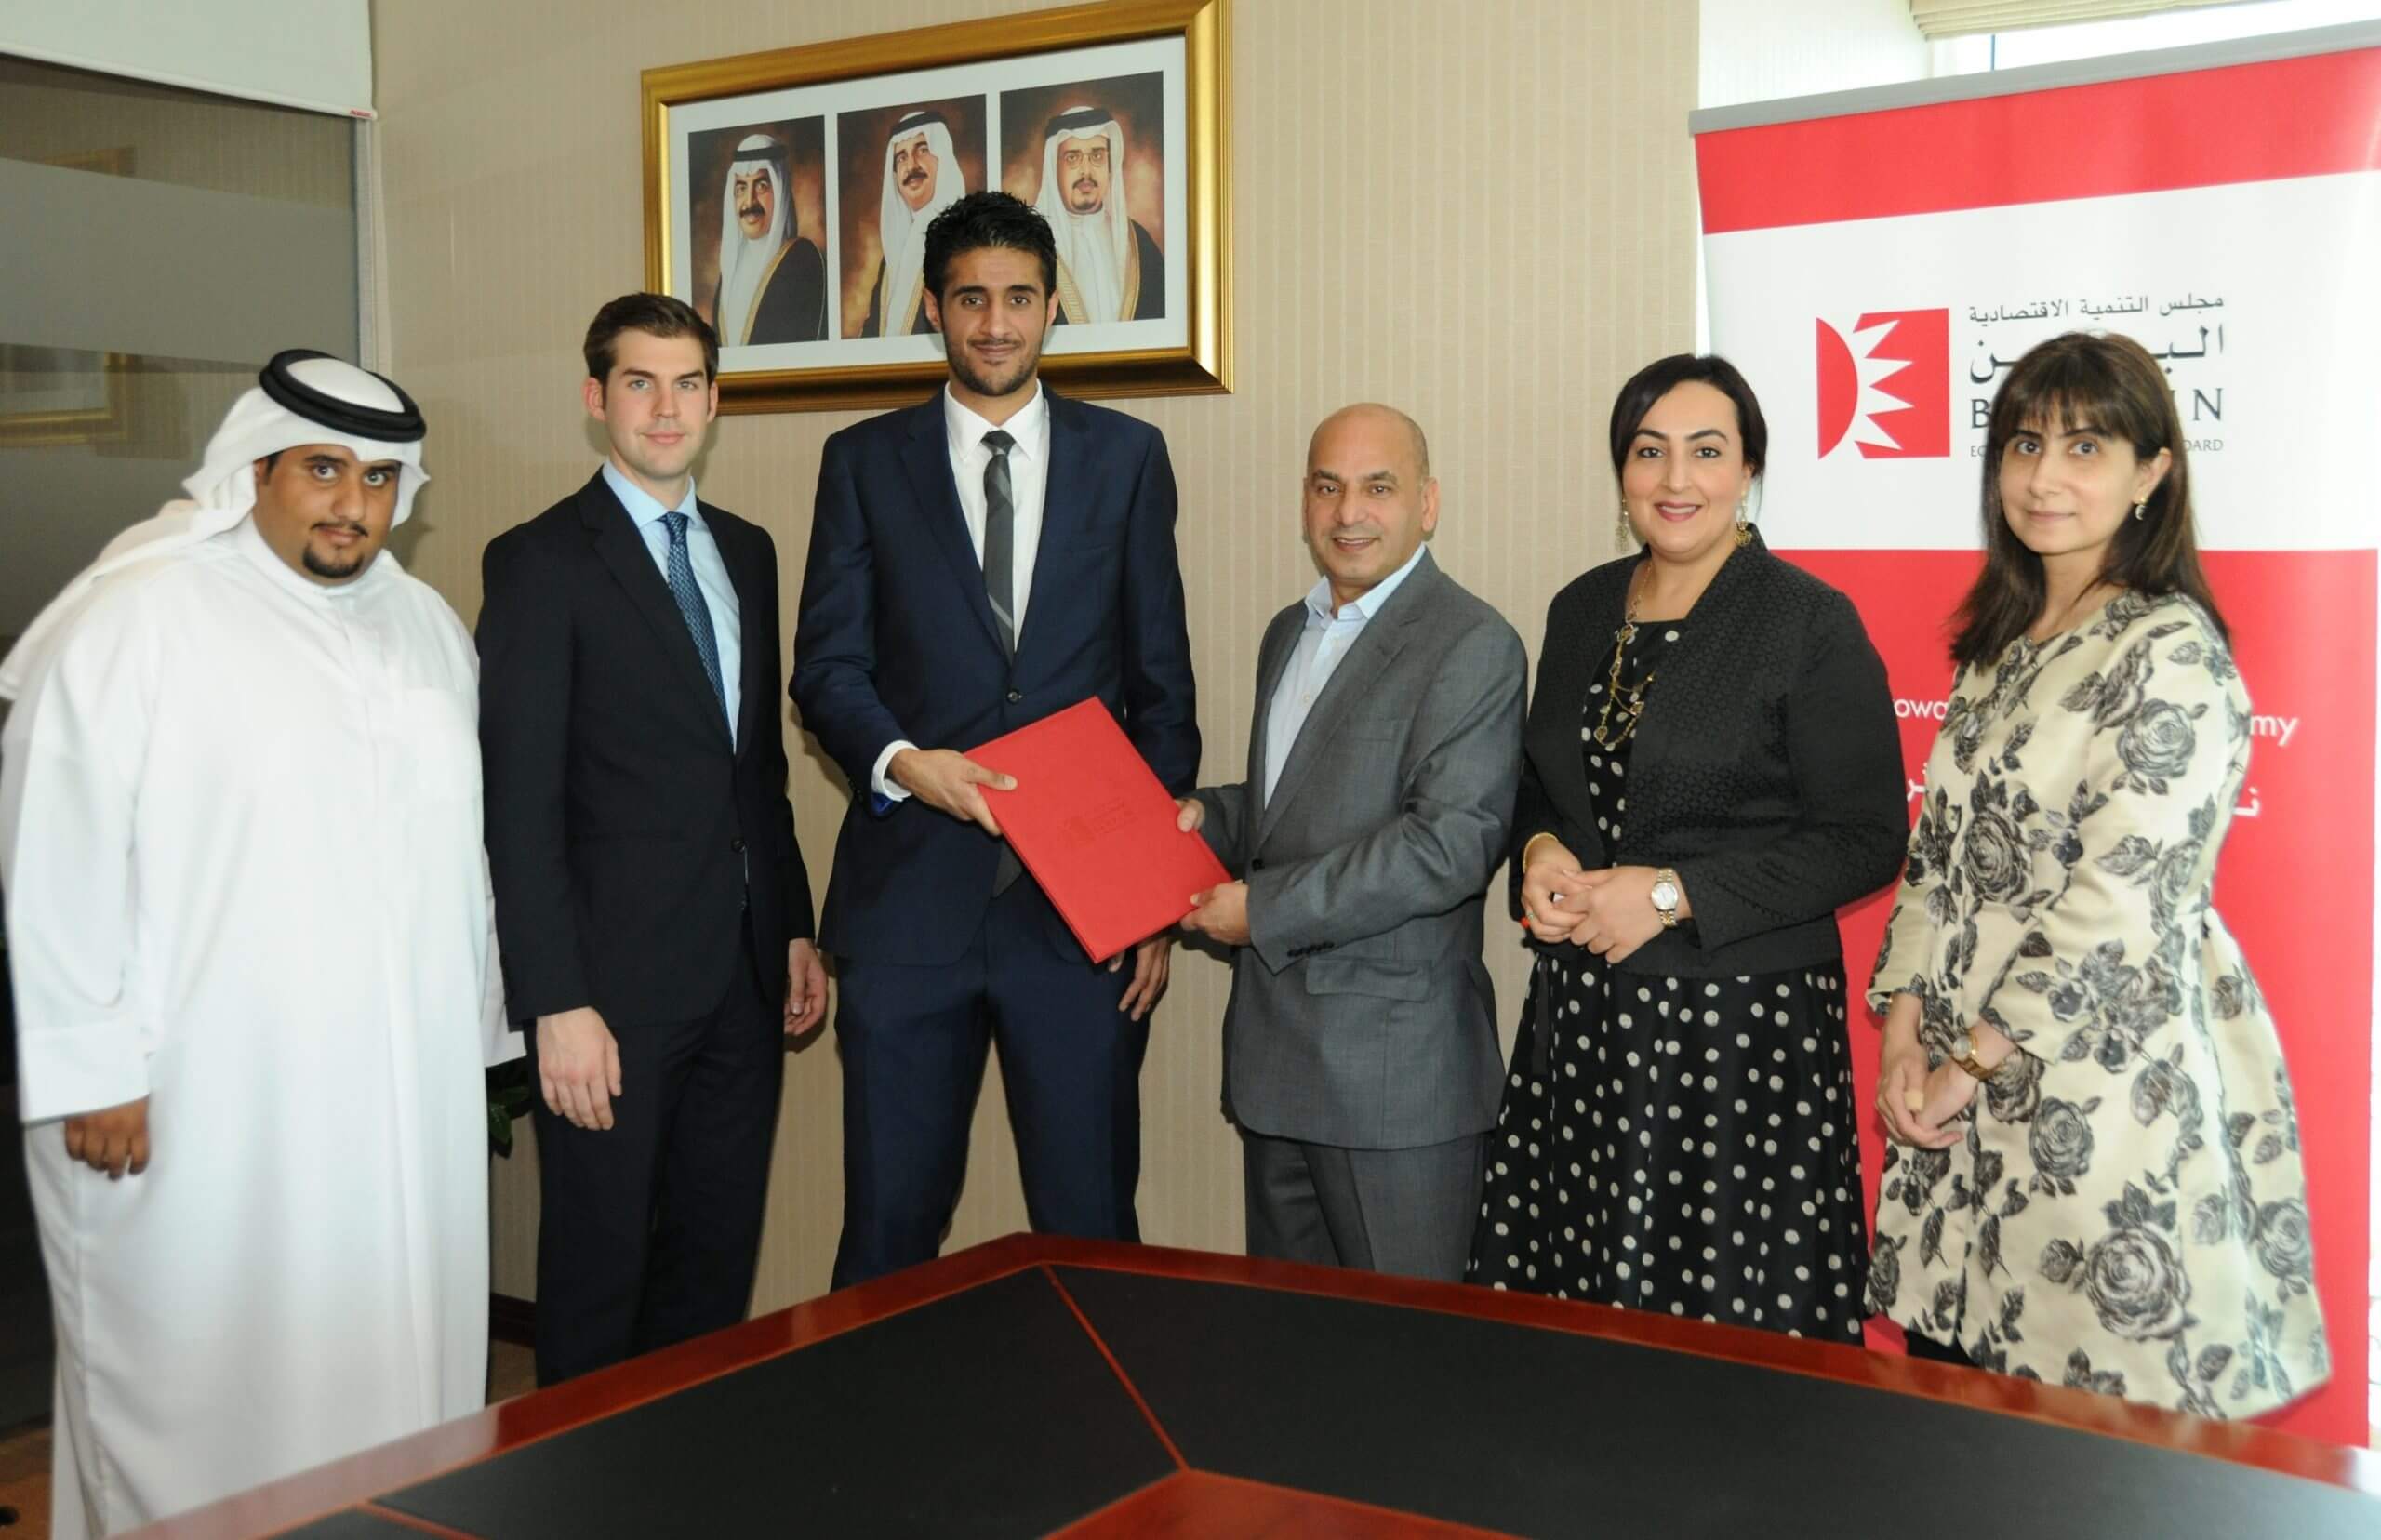 Representatives from T-Linx Technology Solutions Architect and the Bahrain Economic Development Board